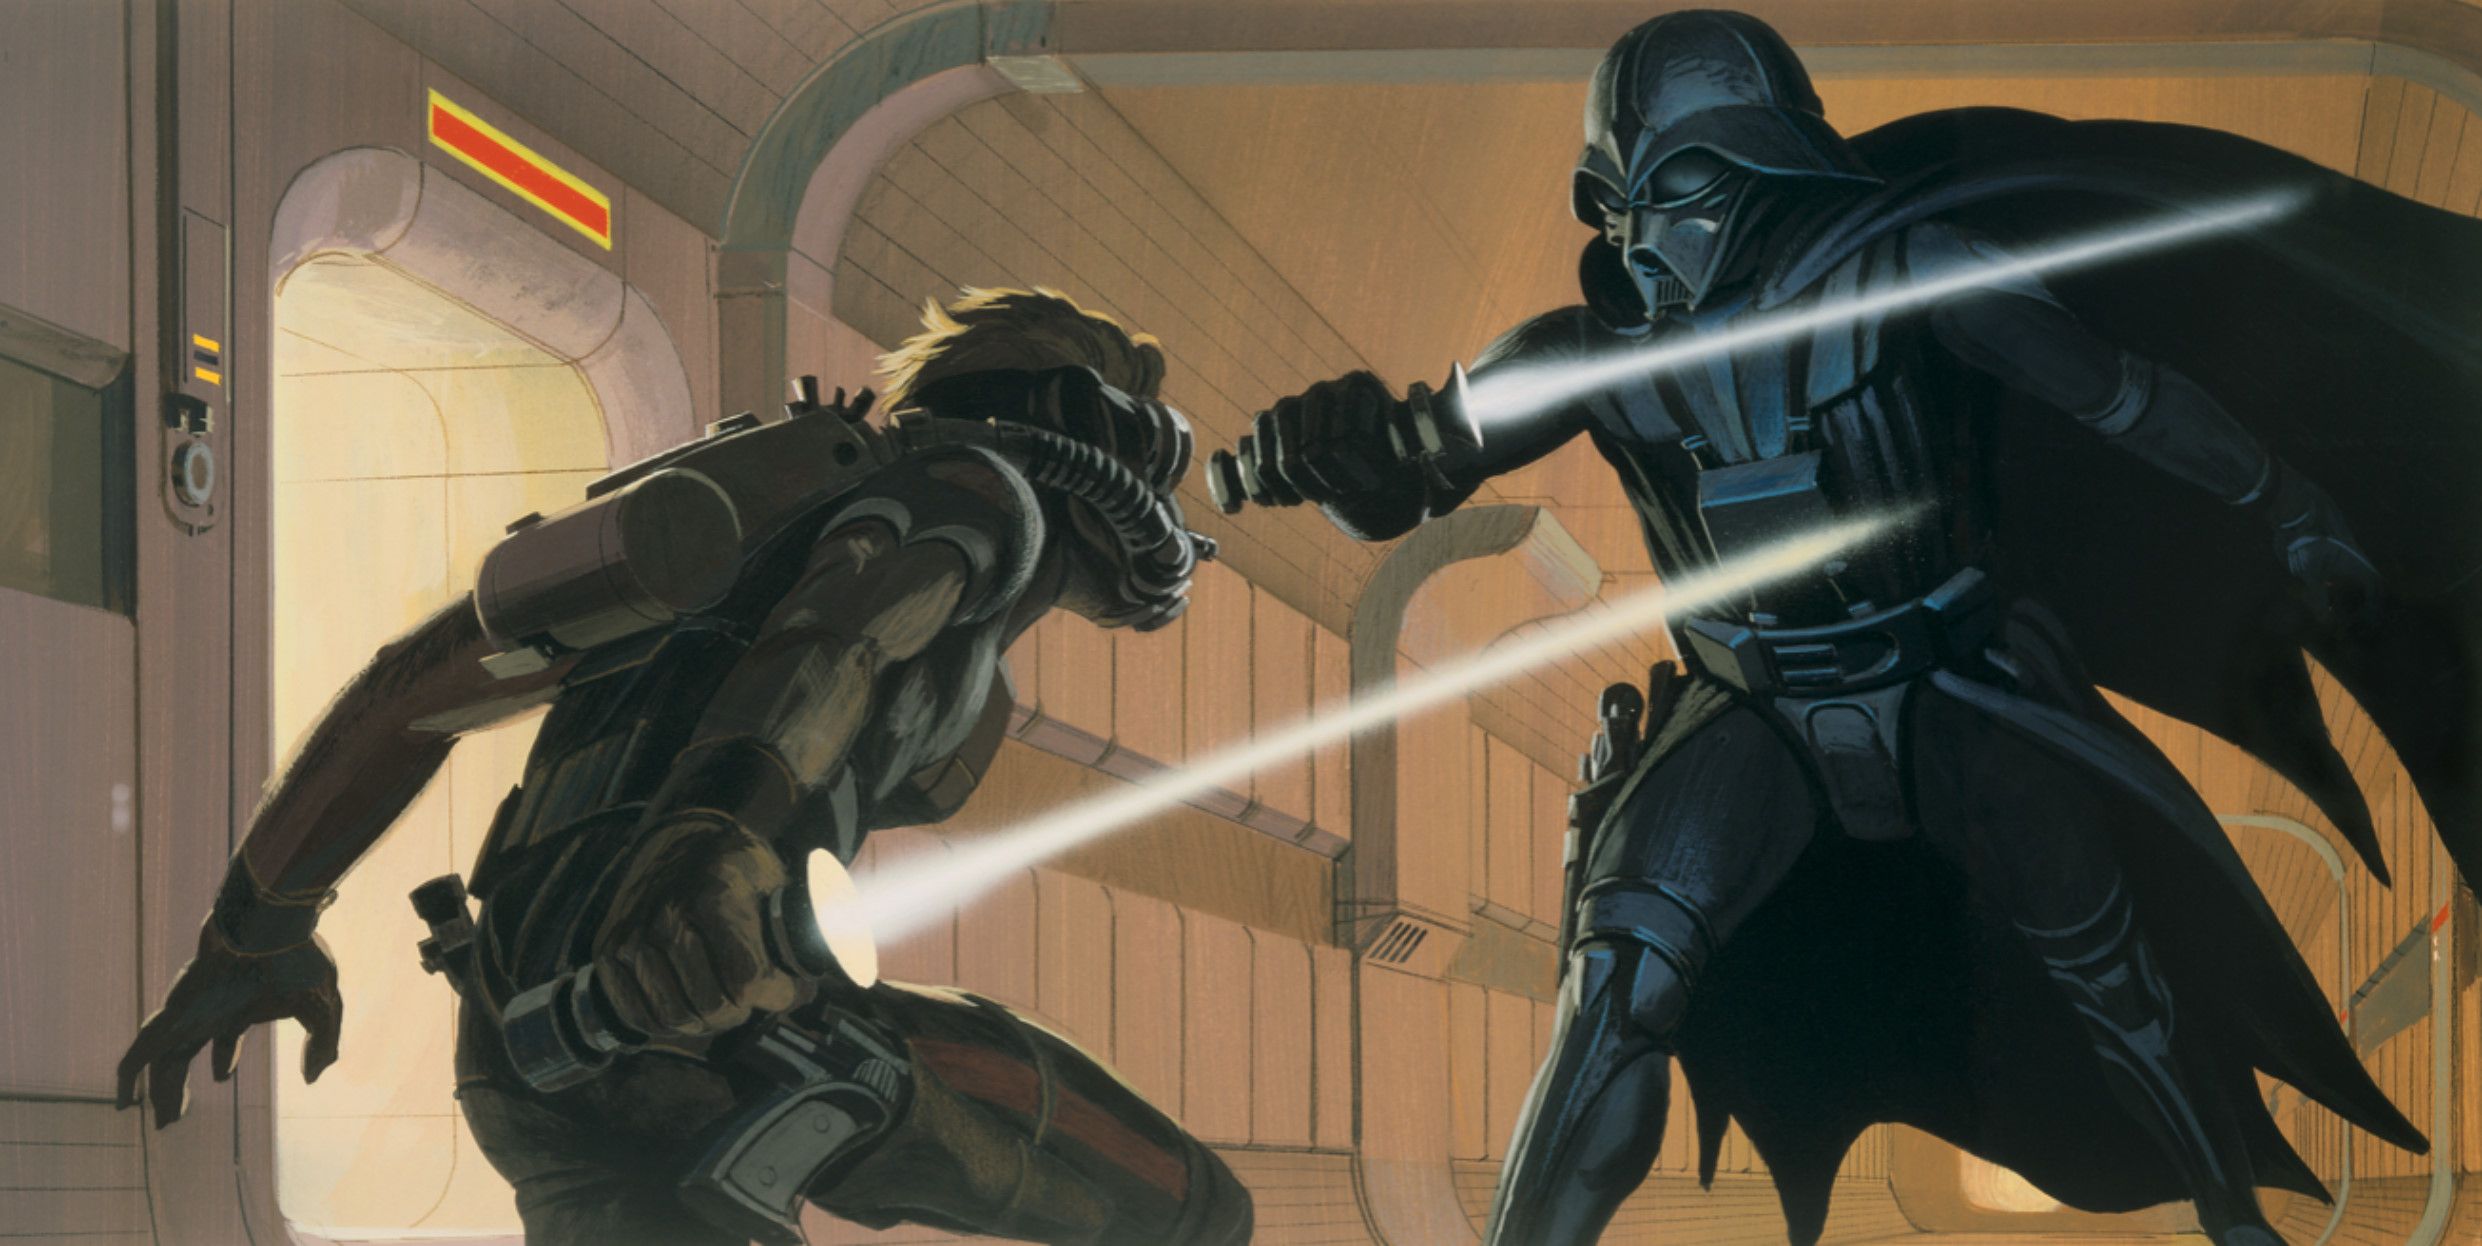 Darth Vader duelling a Jedi Concept art from Ralph McQuarrie